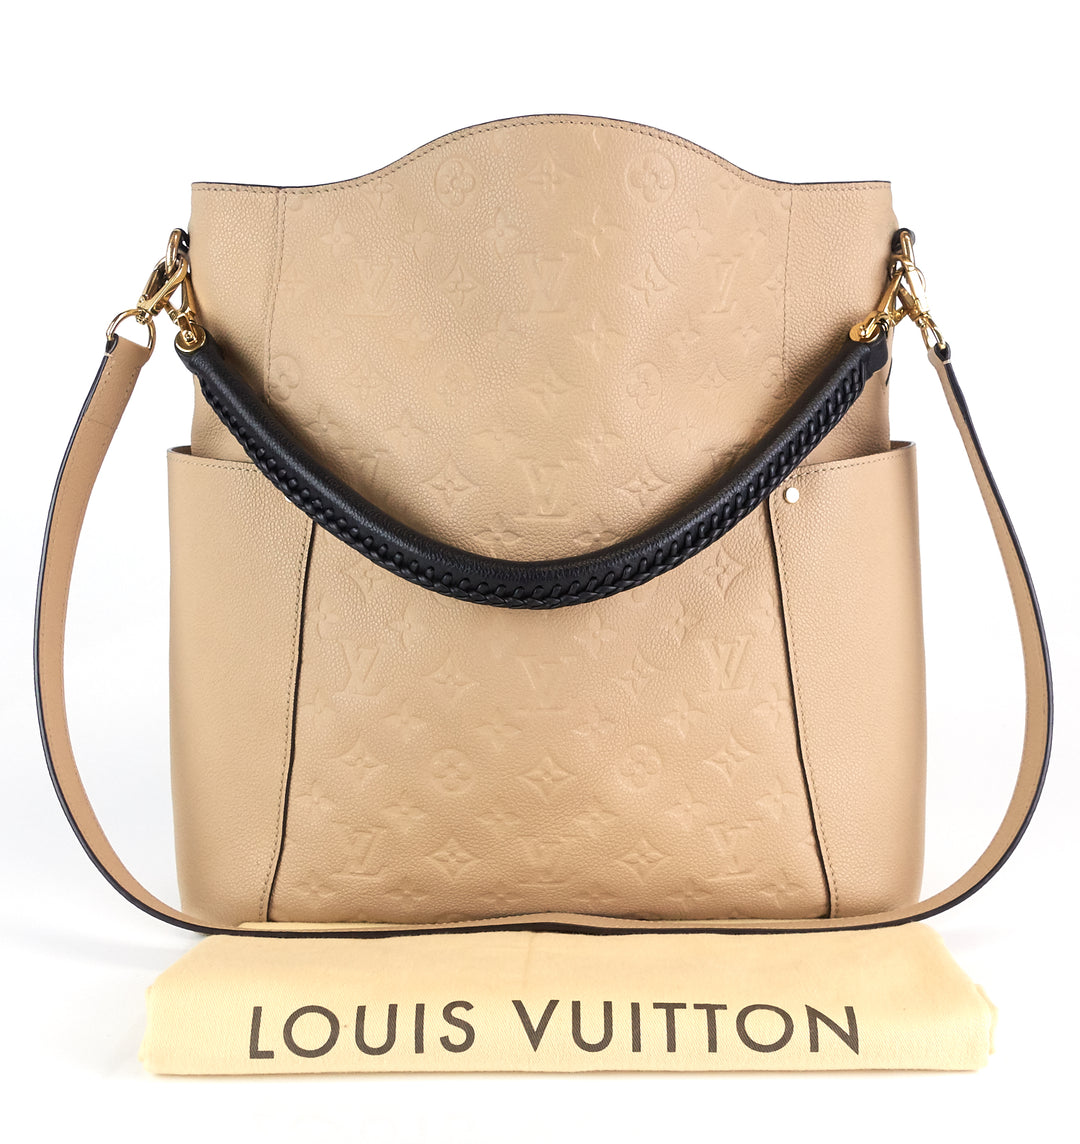 All about the neutrals! Shop this beautiful Louis Vuitton Empreinte Bagatelle  Hobo bag on www.mymoshposh.com!